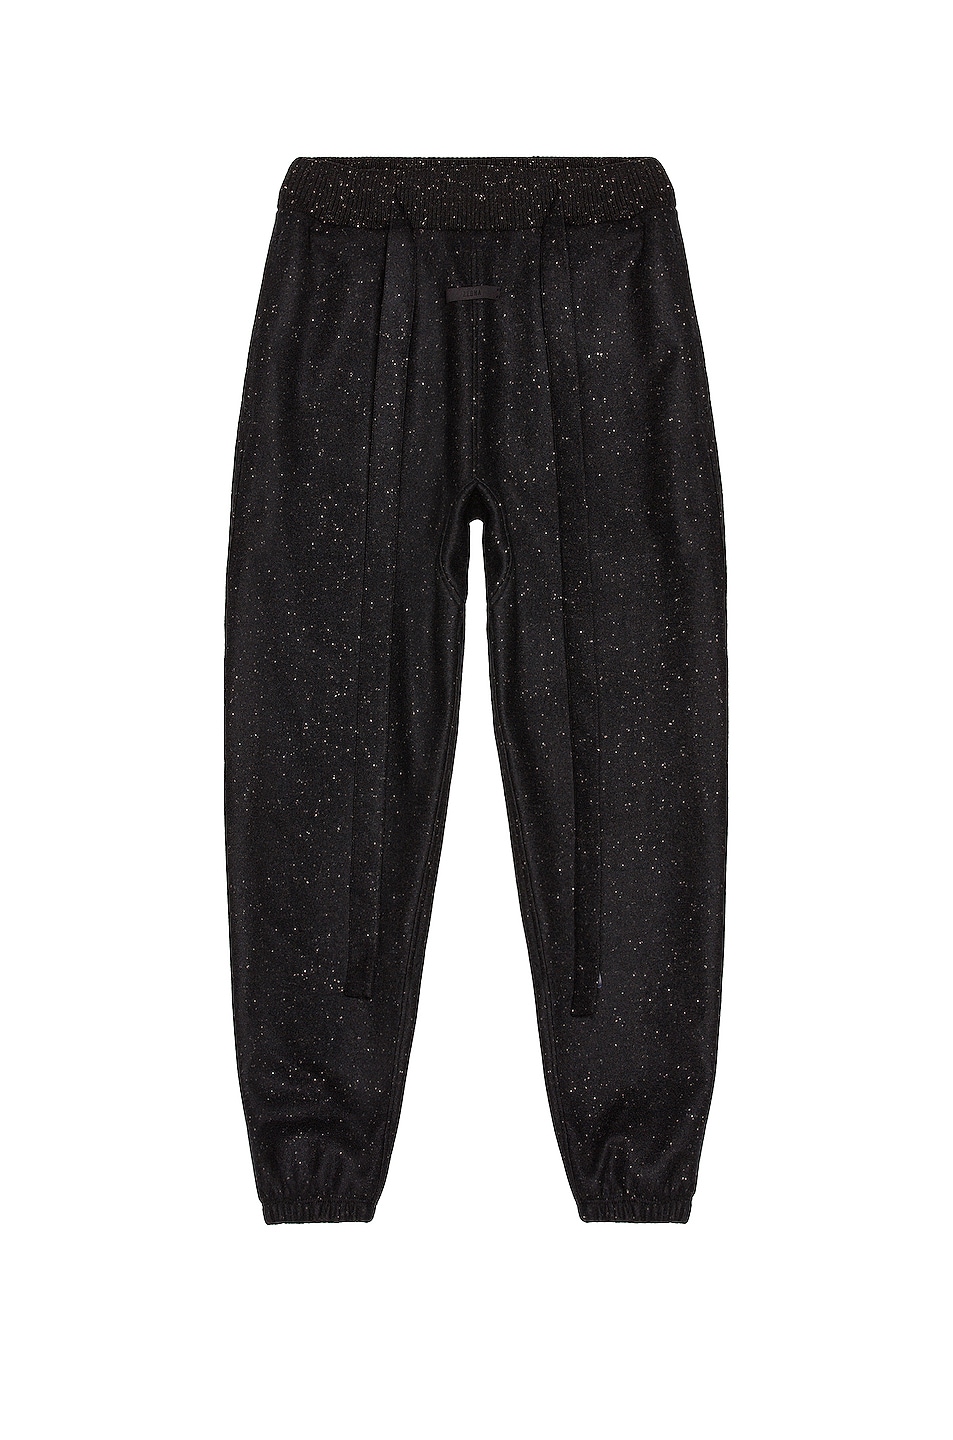 Image 1 of Fear of God Exclusively for Ermenegildo Zegna Joggers in Black